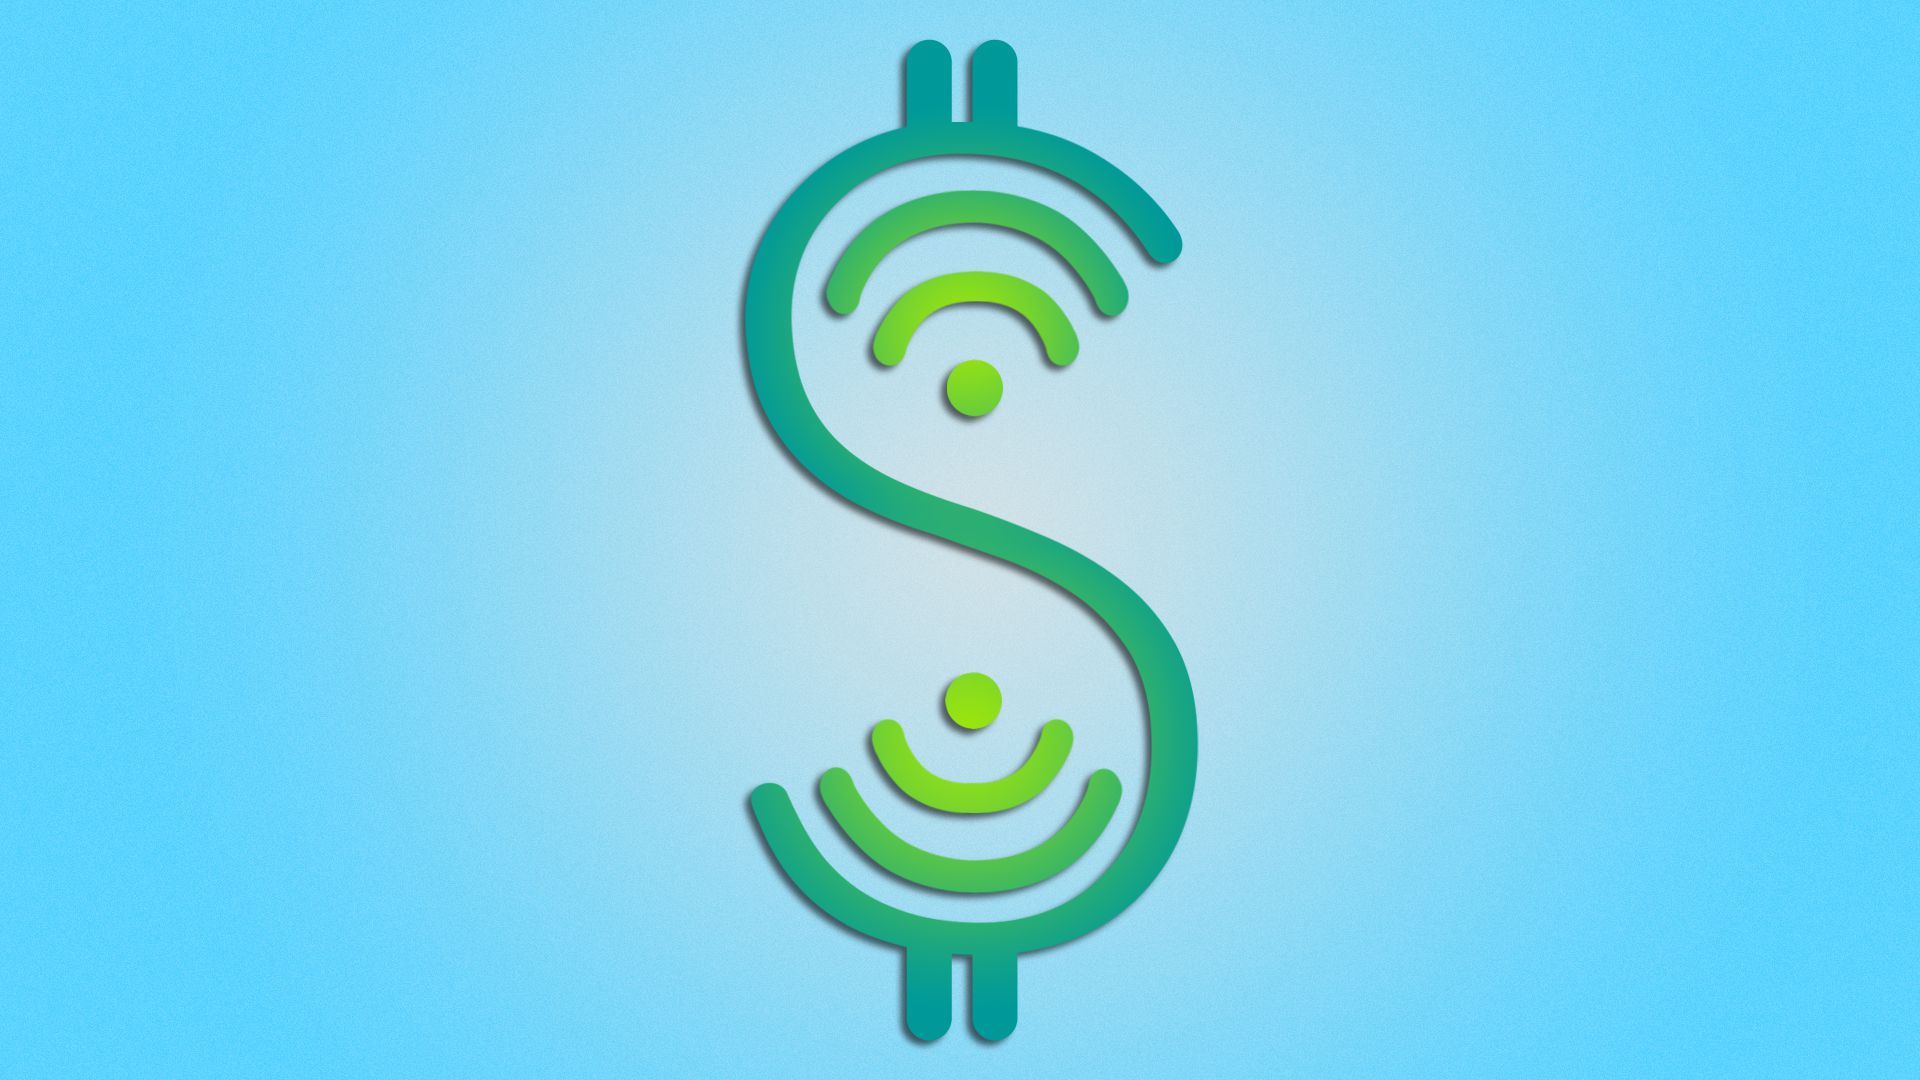 Illustration of a dollar sign made from wifi symbols